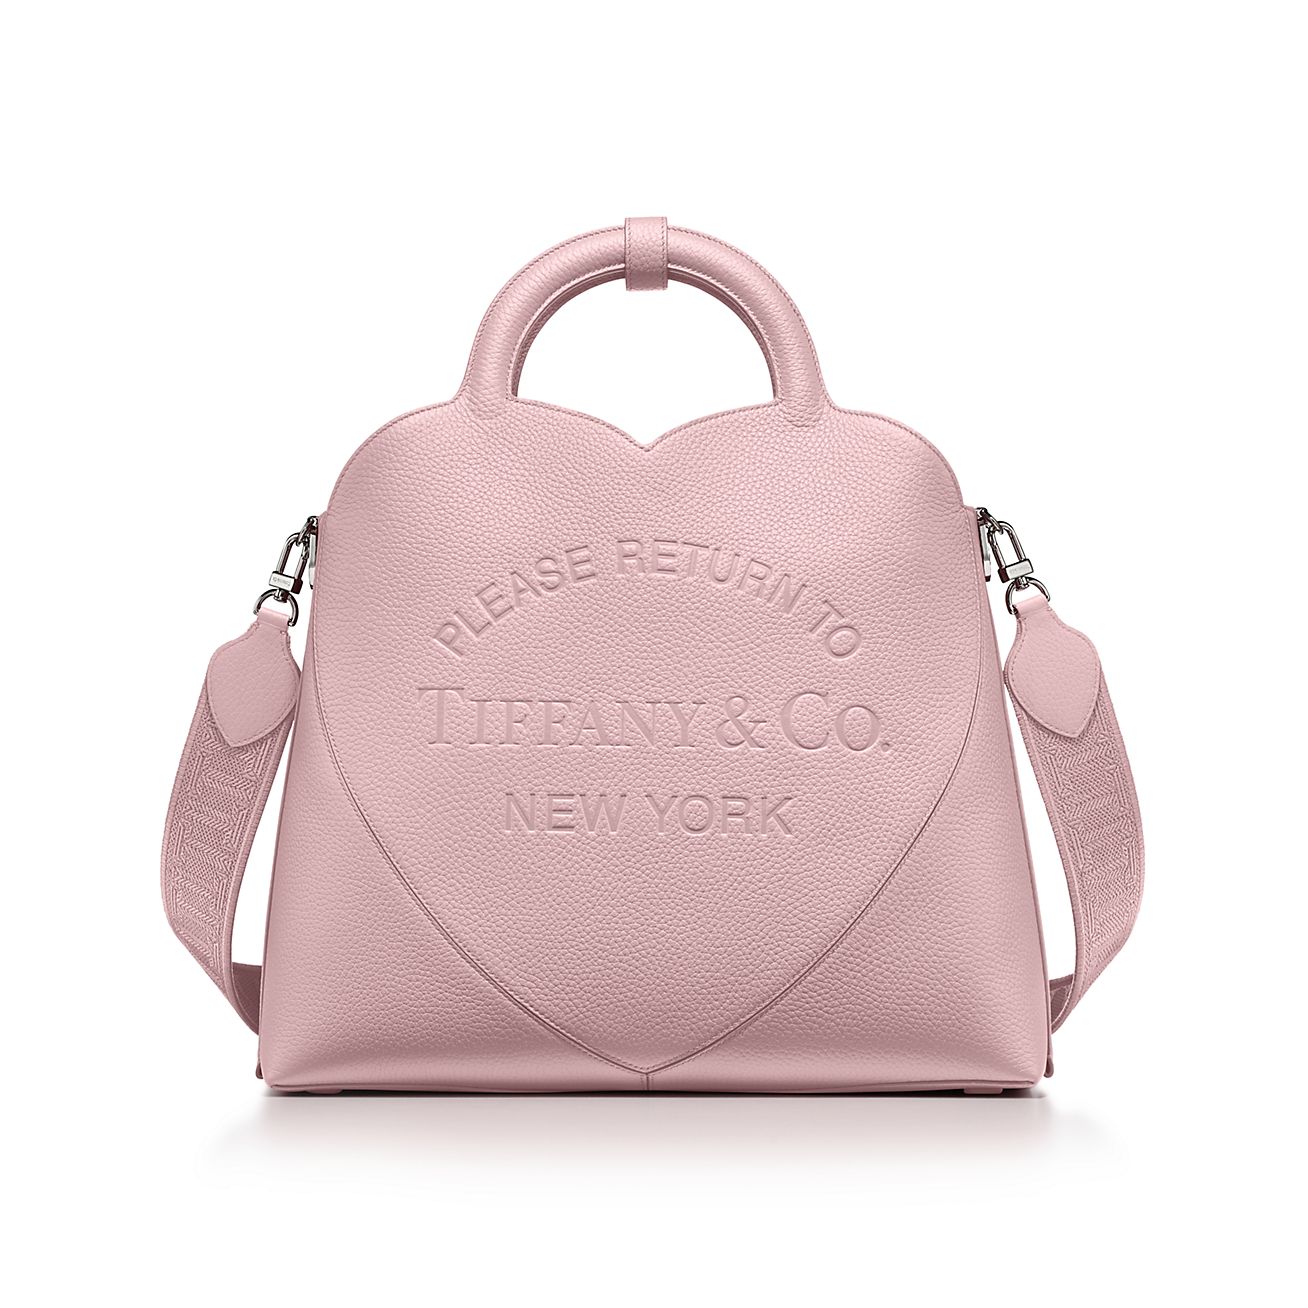 Return to Tiffany® Medium Tote Bag in Crystal Pink Leather | Tiffany & Co.